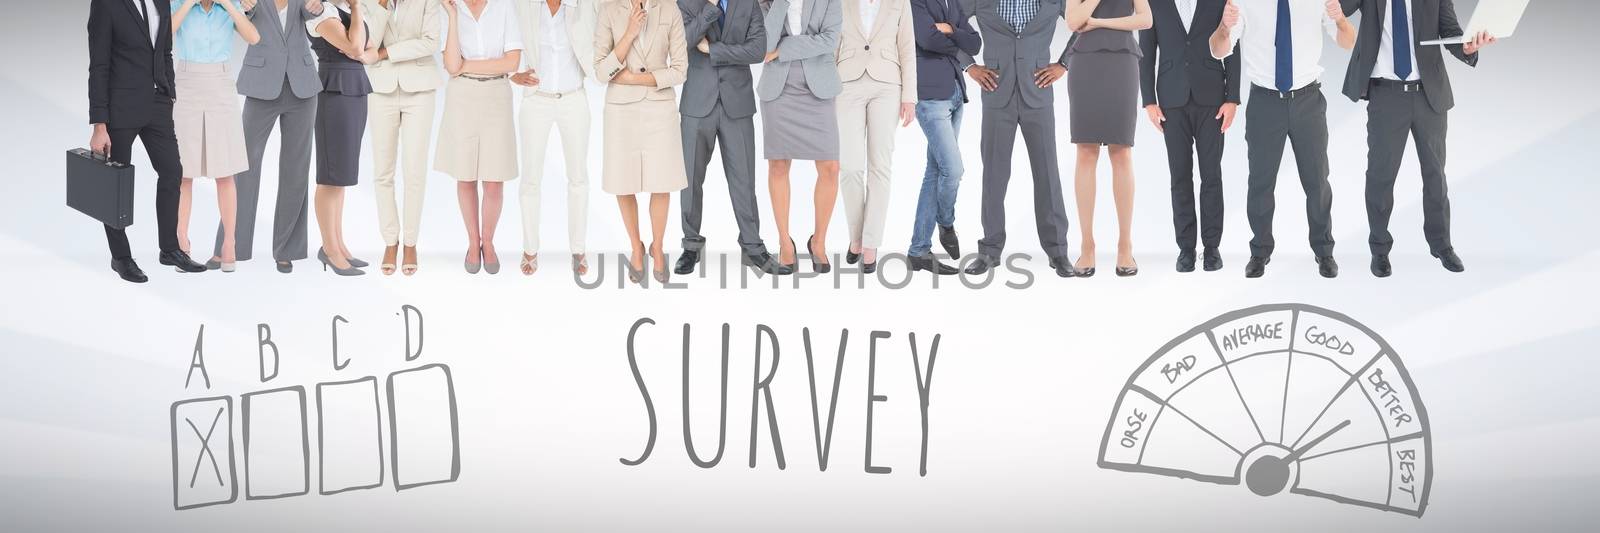 Group of business people standing in front of survey graphics by Wavebreakmedia